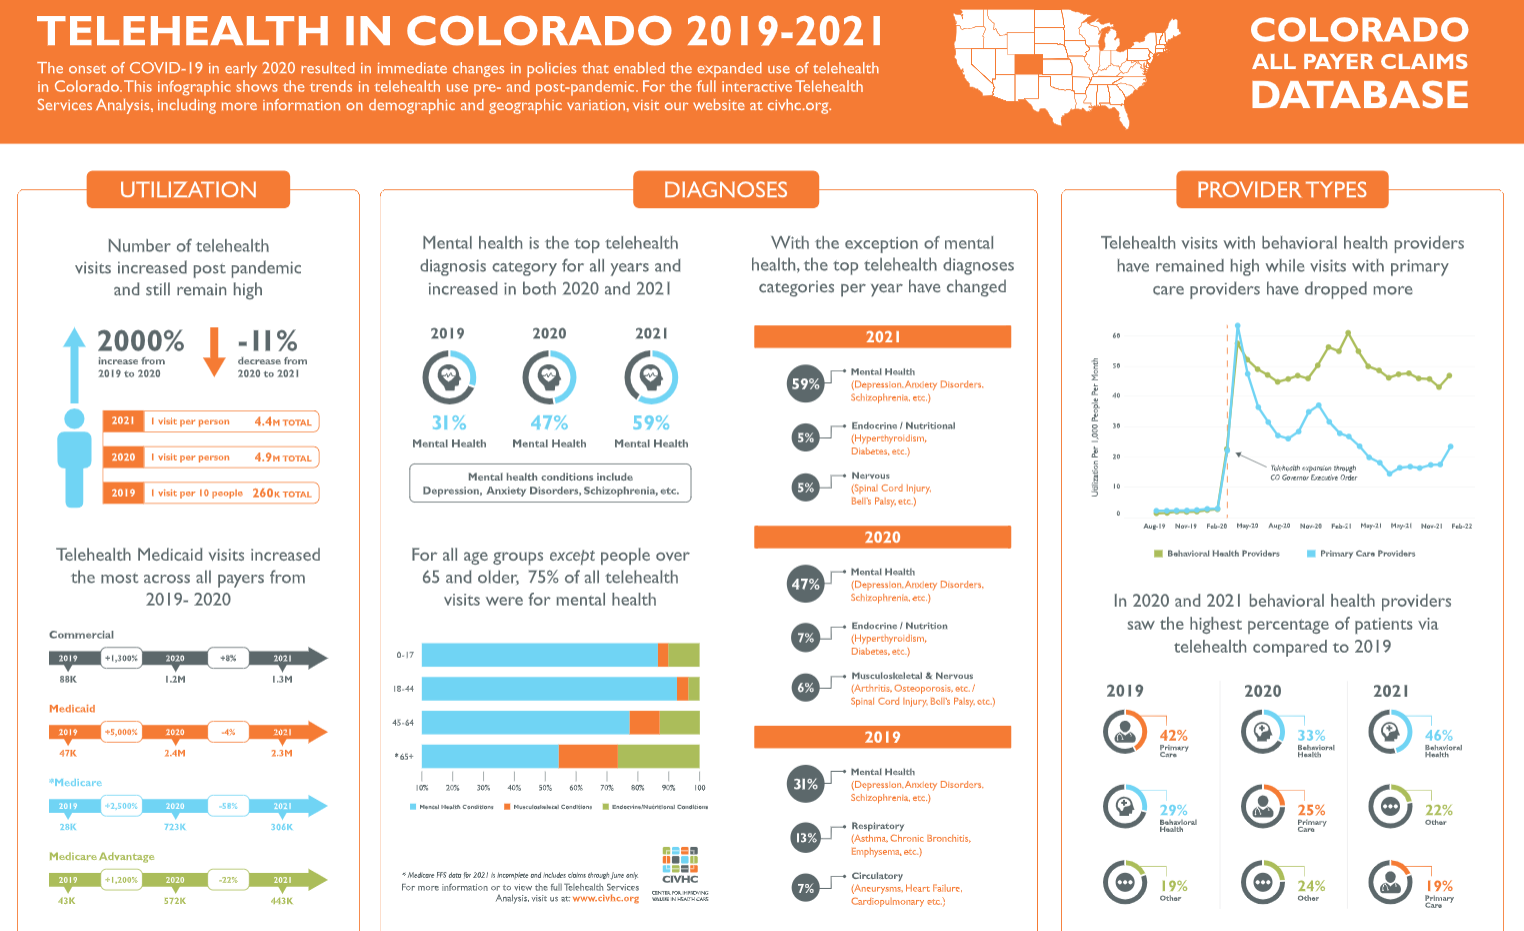 Infographic of telehealth in Colorado showcasing diagnoses, utilization type, and provider types.